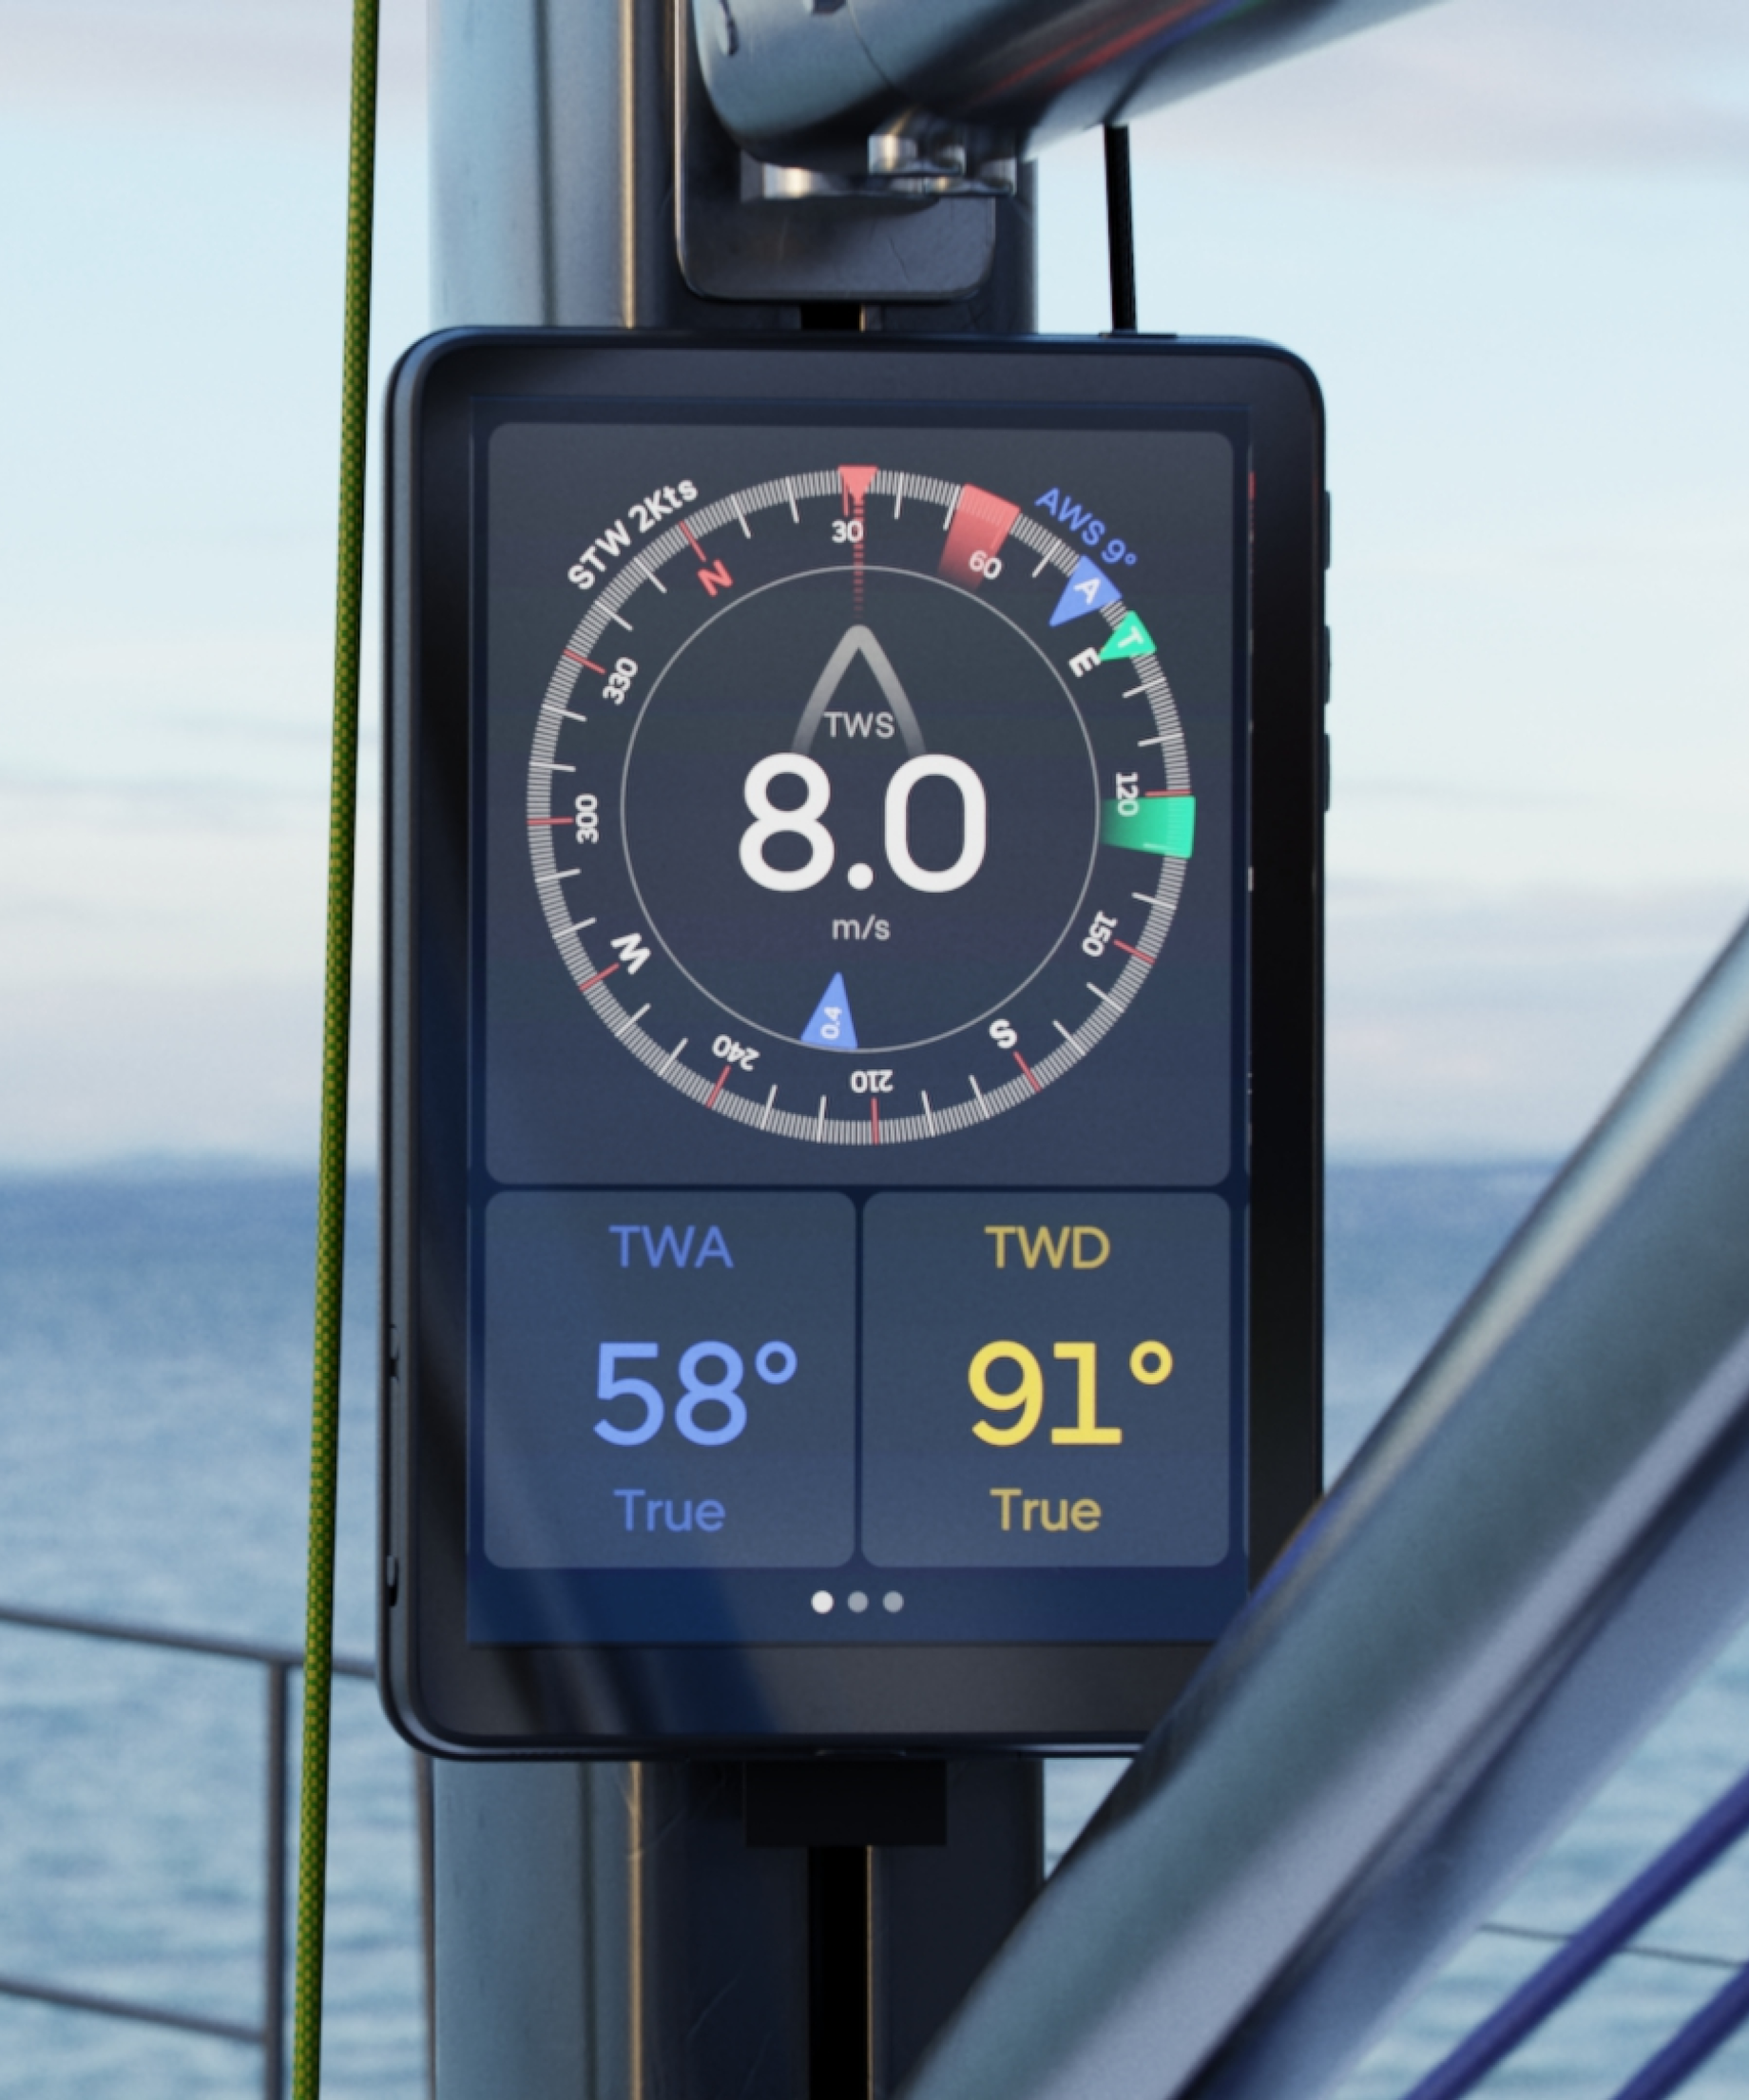 Mast mounting enables the entire crew to keep track of the wind and your sailing performance.